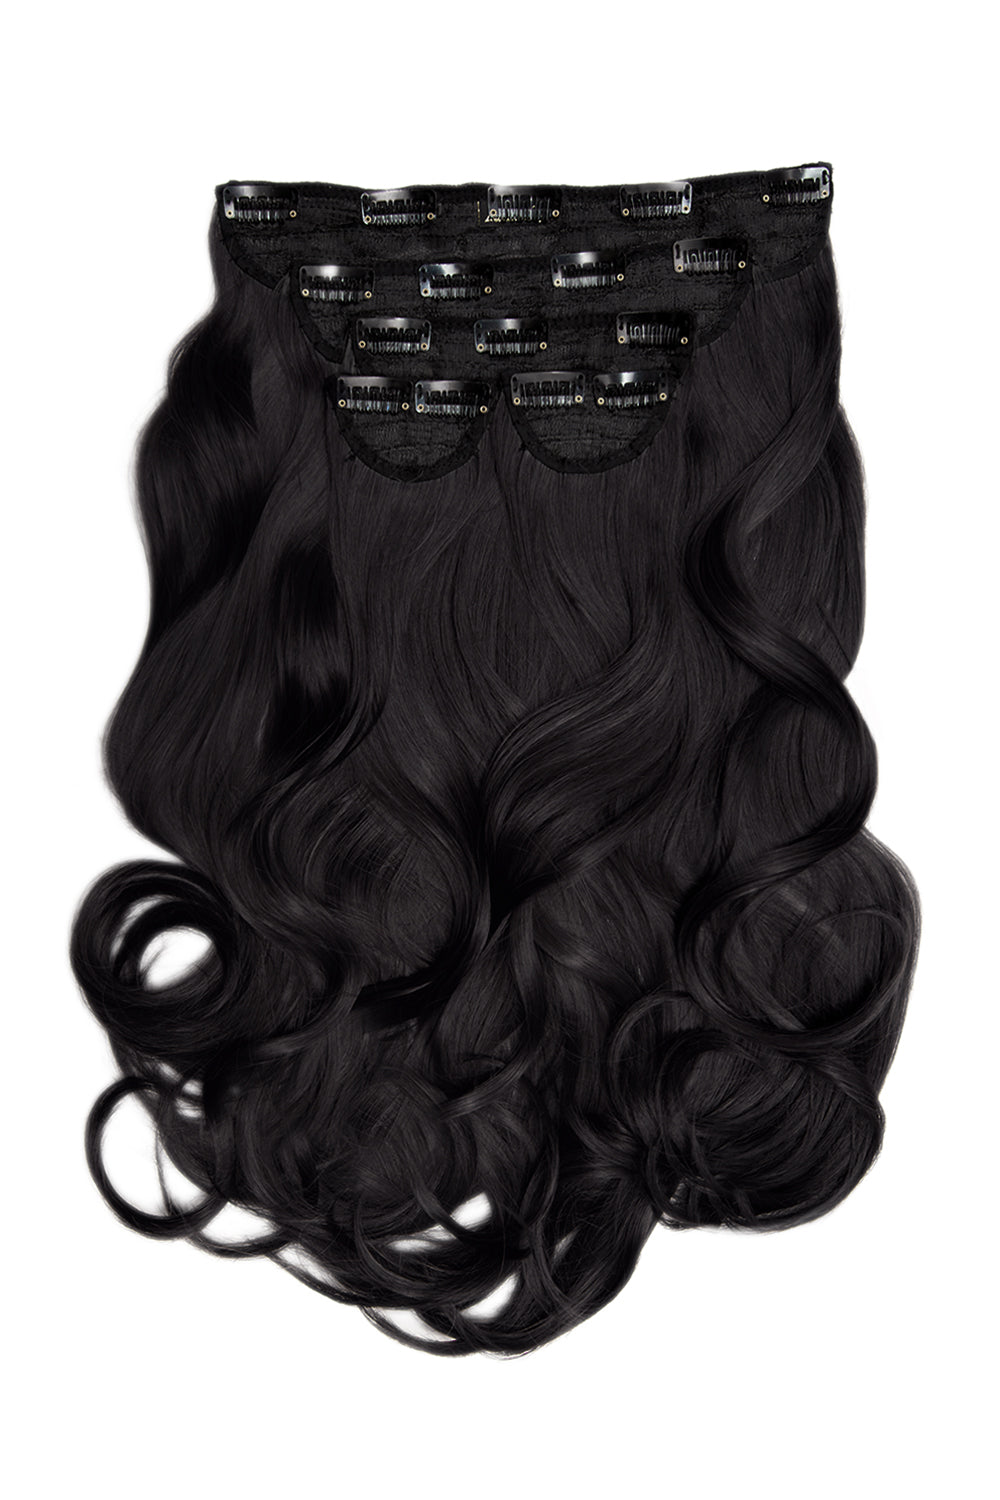 Super Thick 22" 5 Piece Blow Dry Wavy Clip In Hair Extensions - Raven